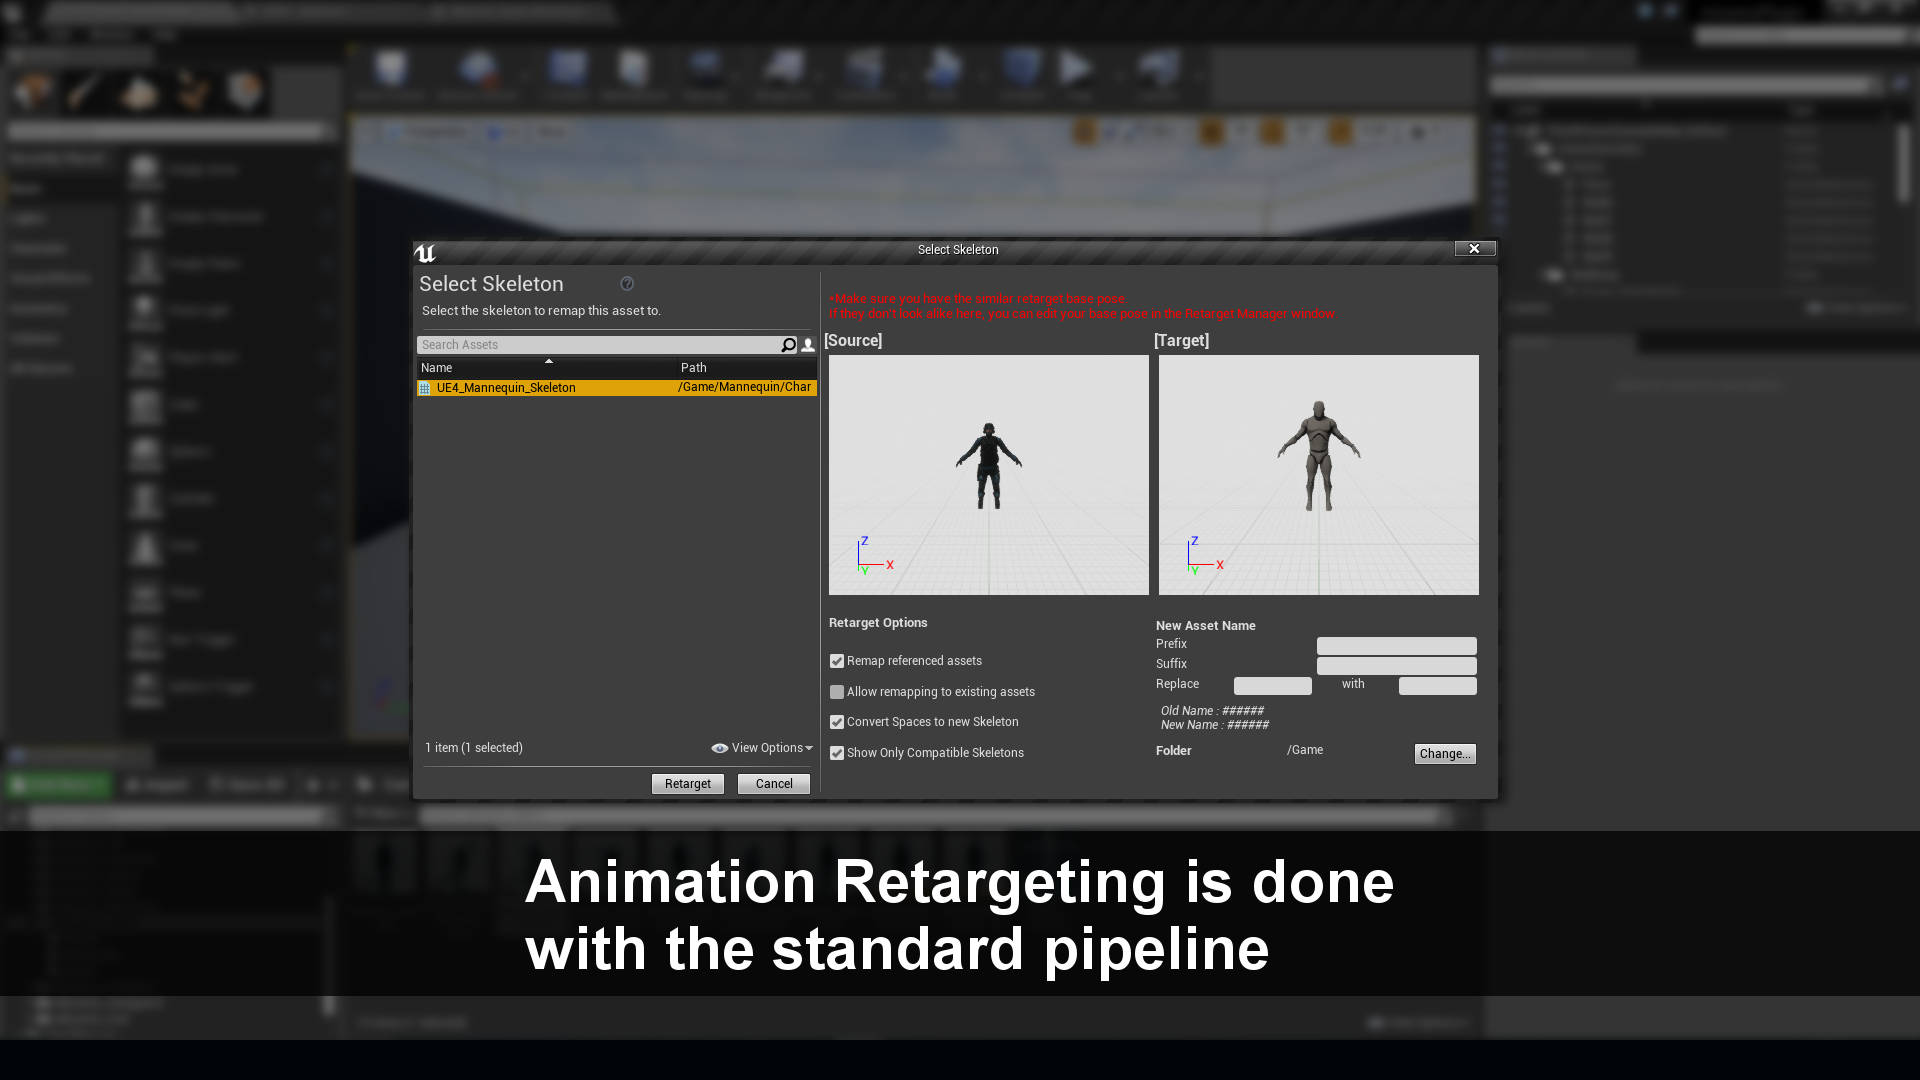 Animation Retargeting is done with the standard pipeline